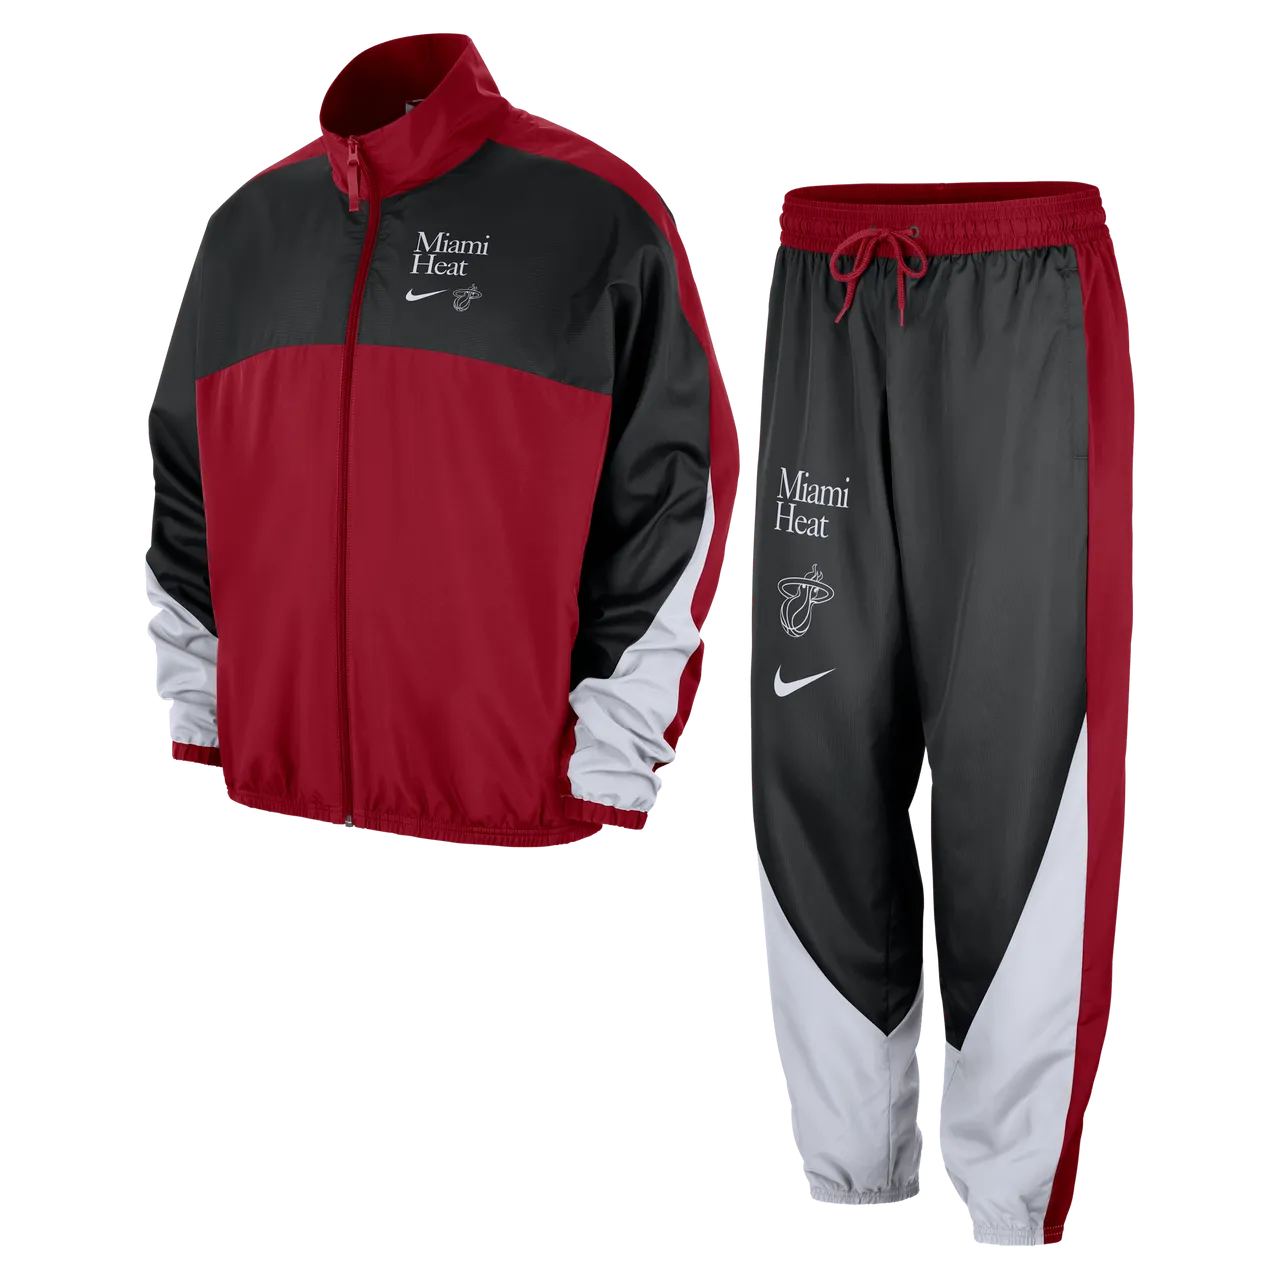 Miami Heat Starting 5 Courtside Men's Nike NBA Graphic Tracksuit - Red - Polyester